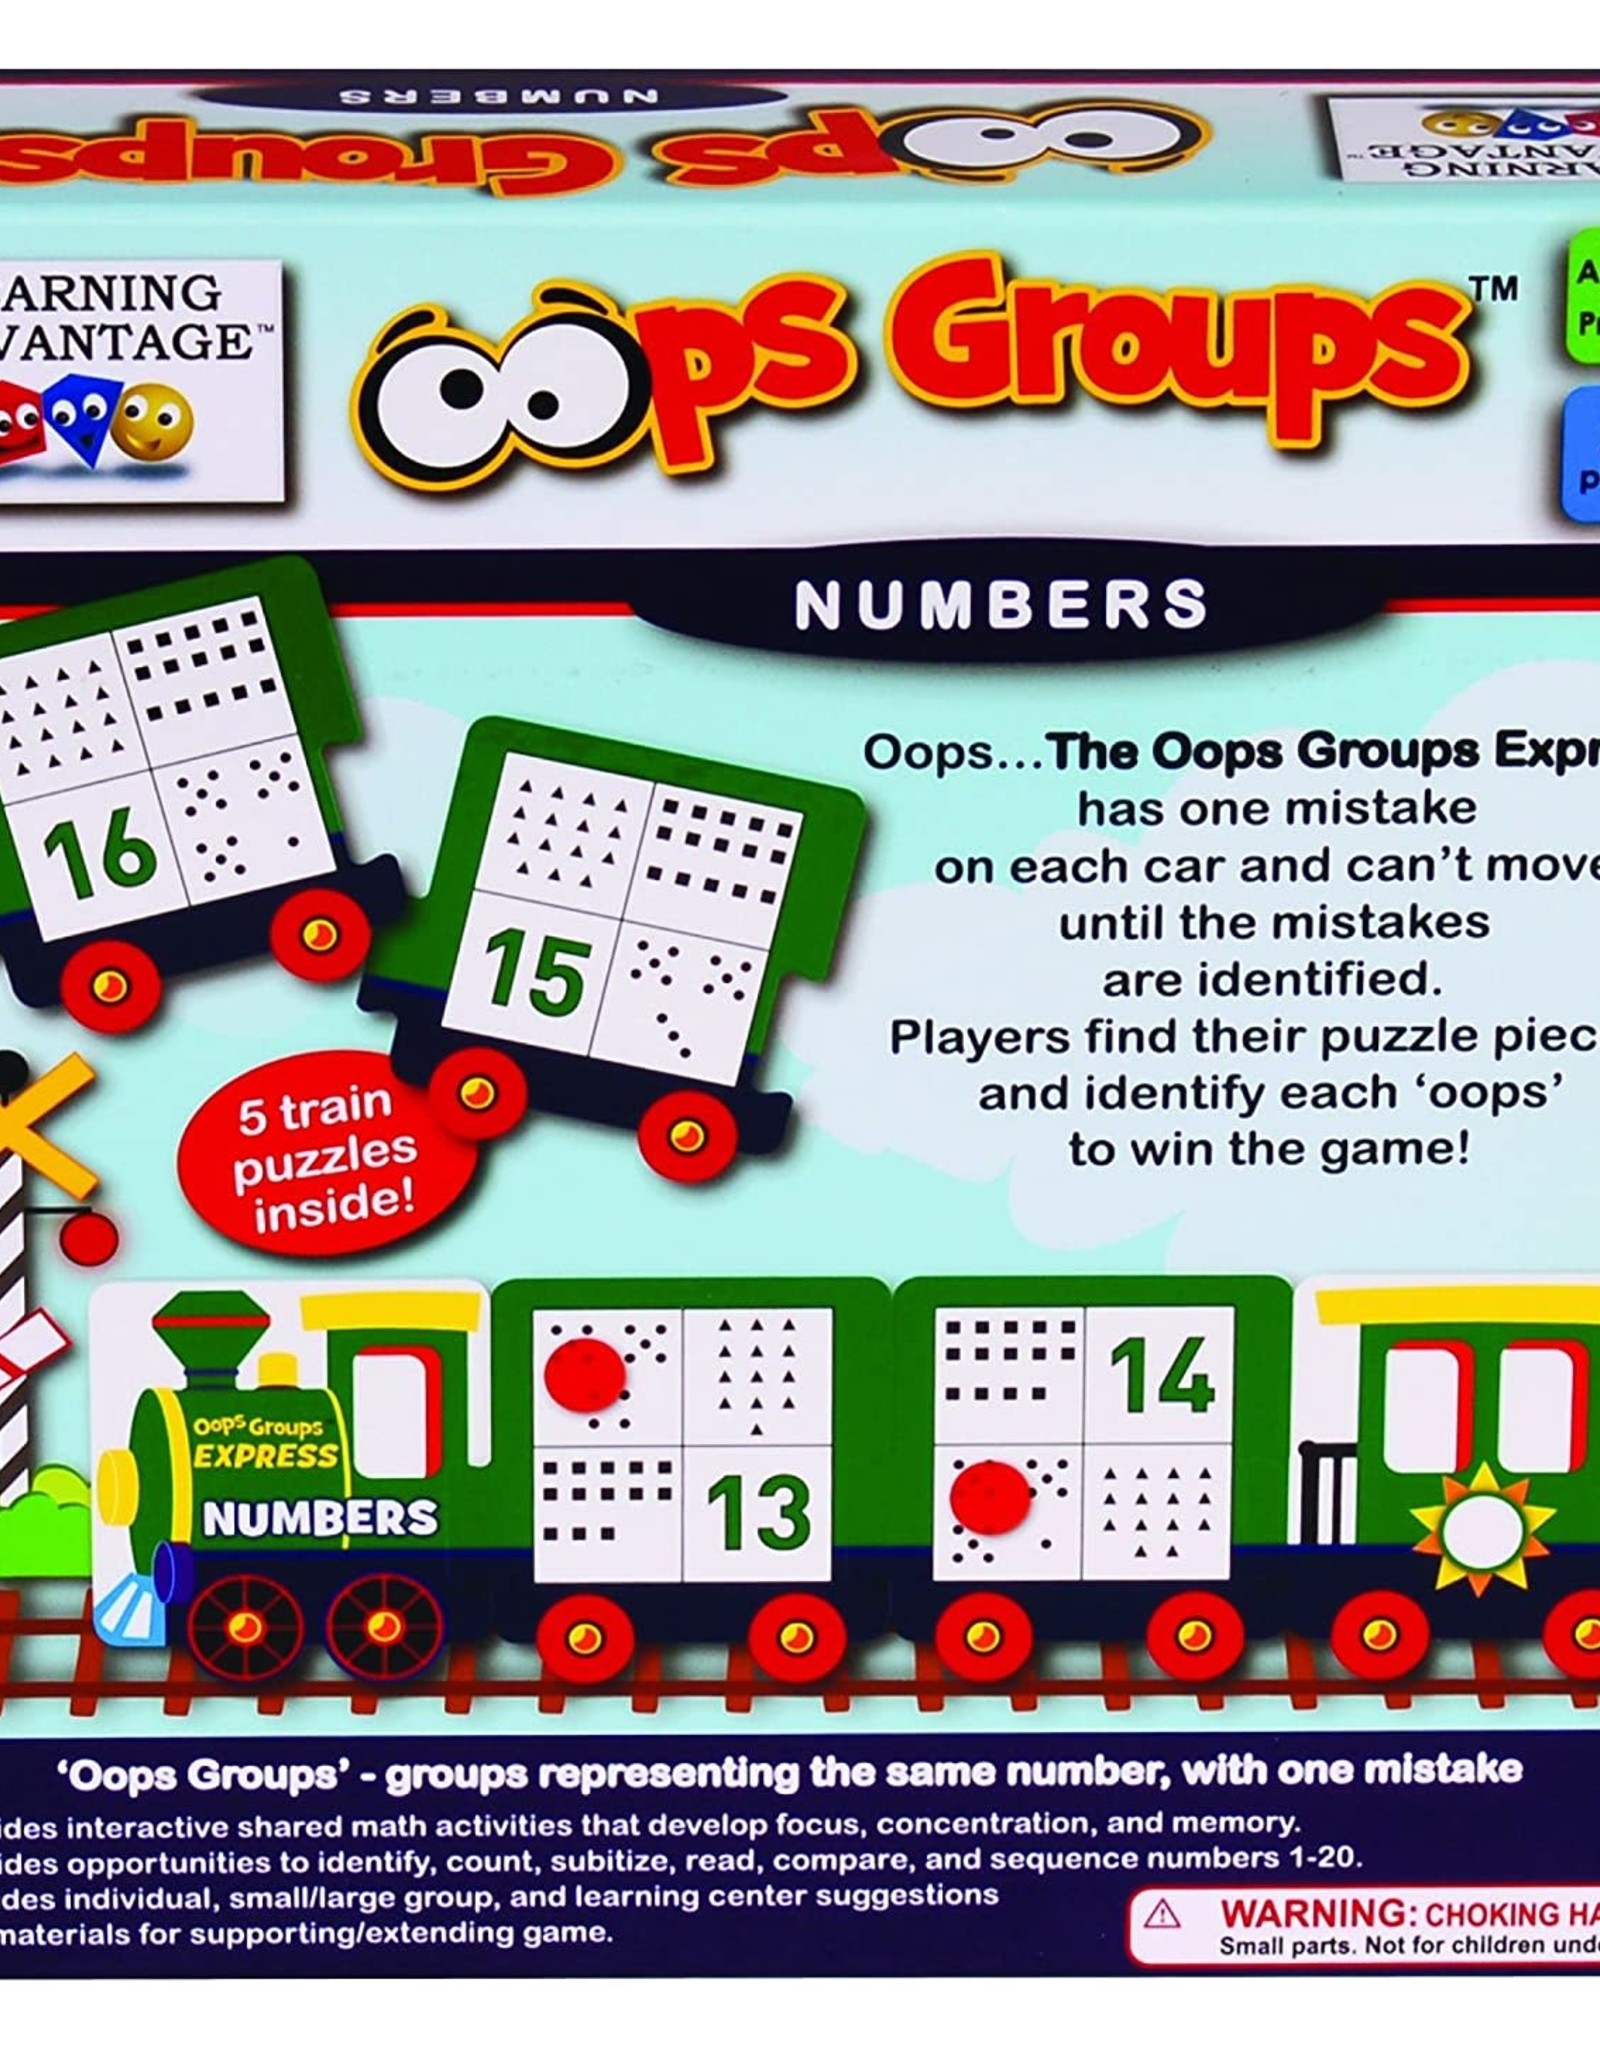 LEARNING ADVANTAGE NUMBERS OOPS GROUPS***